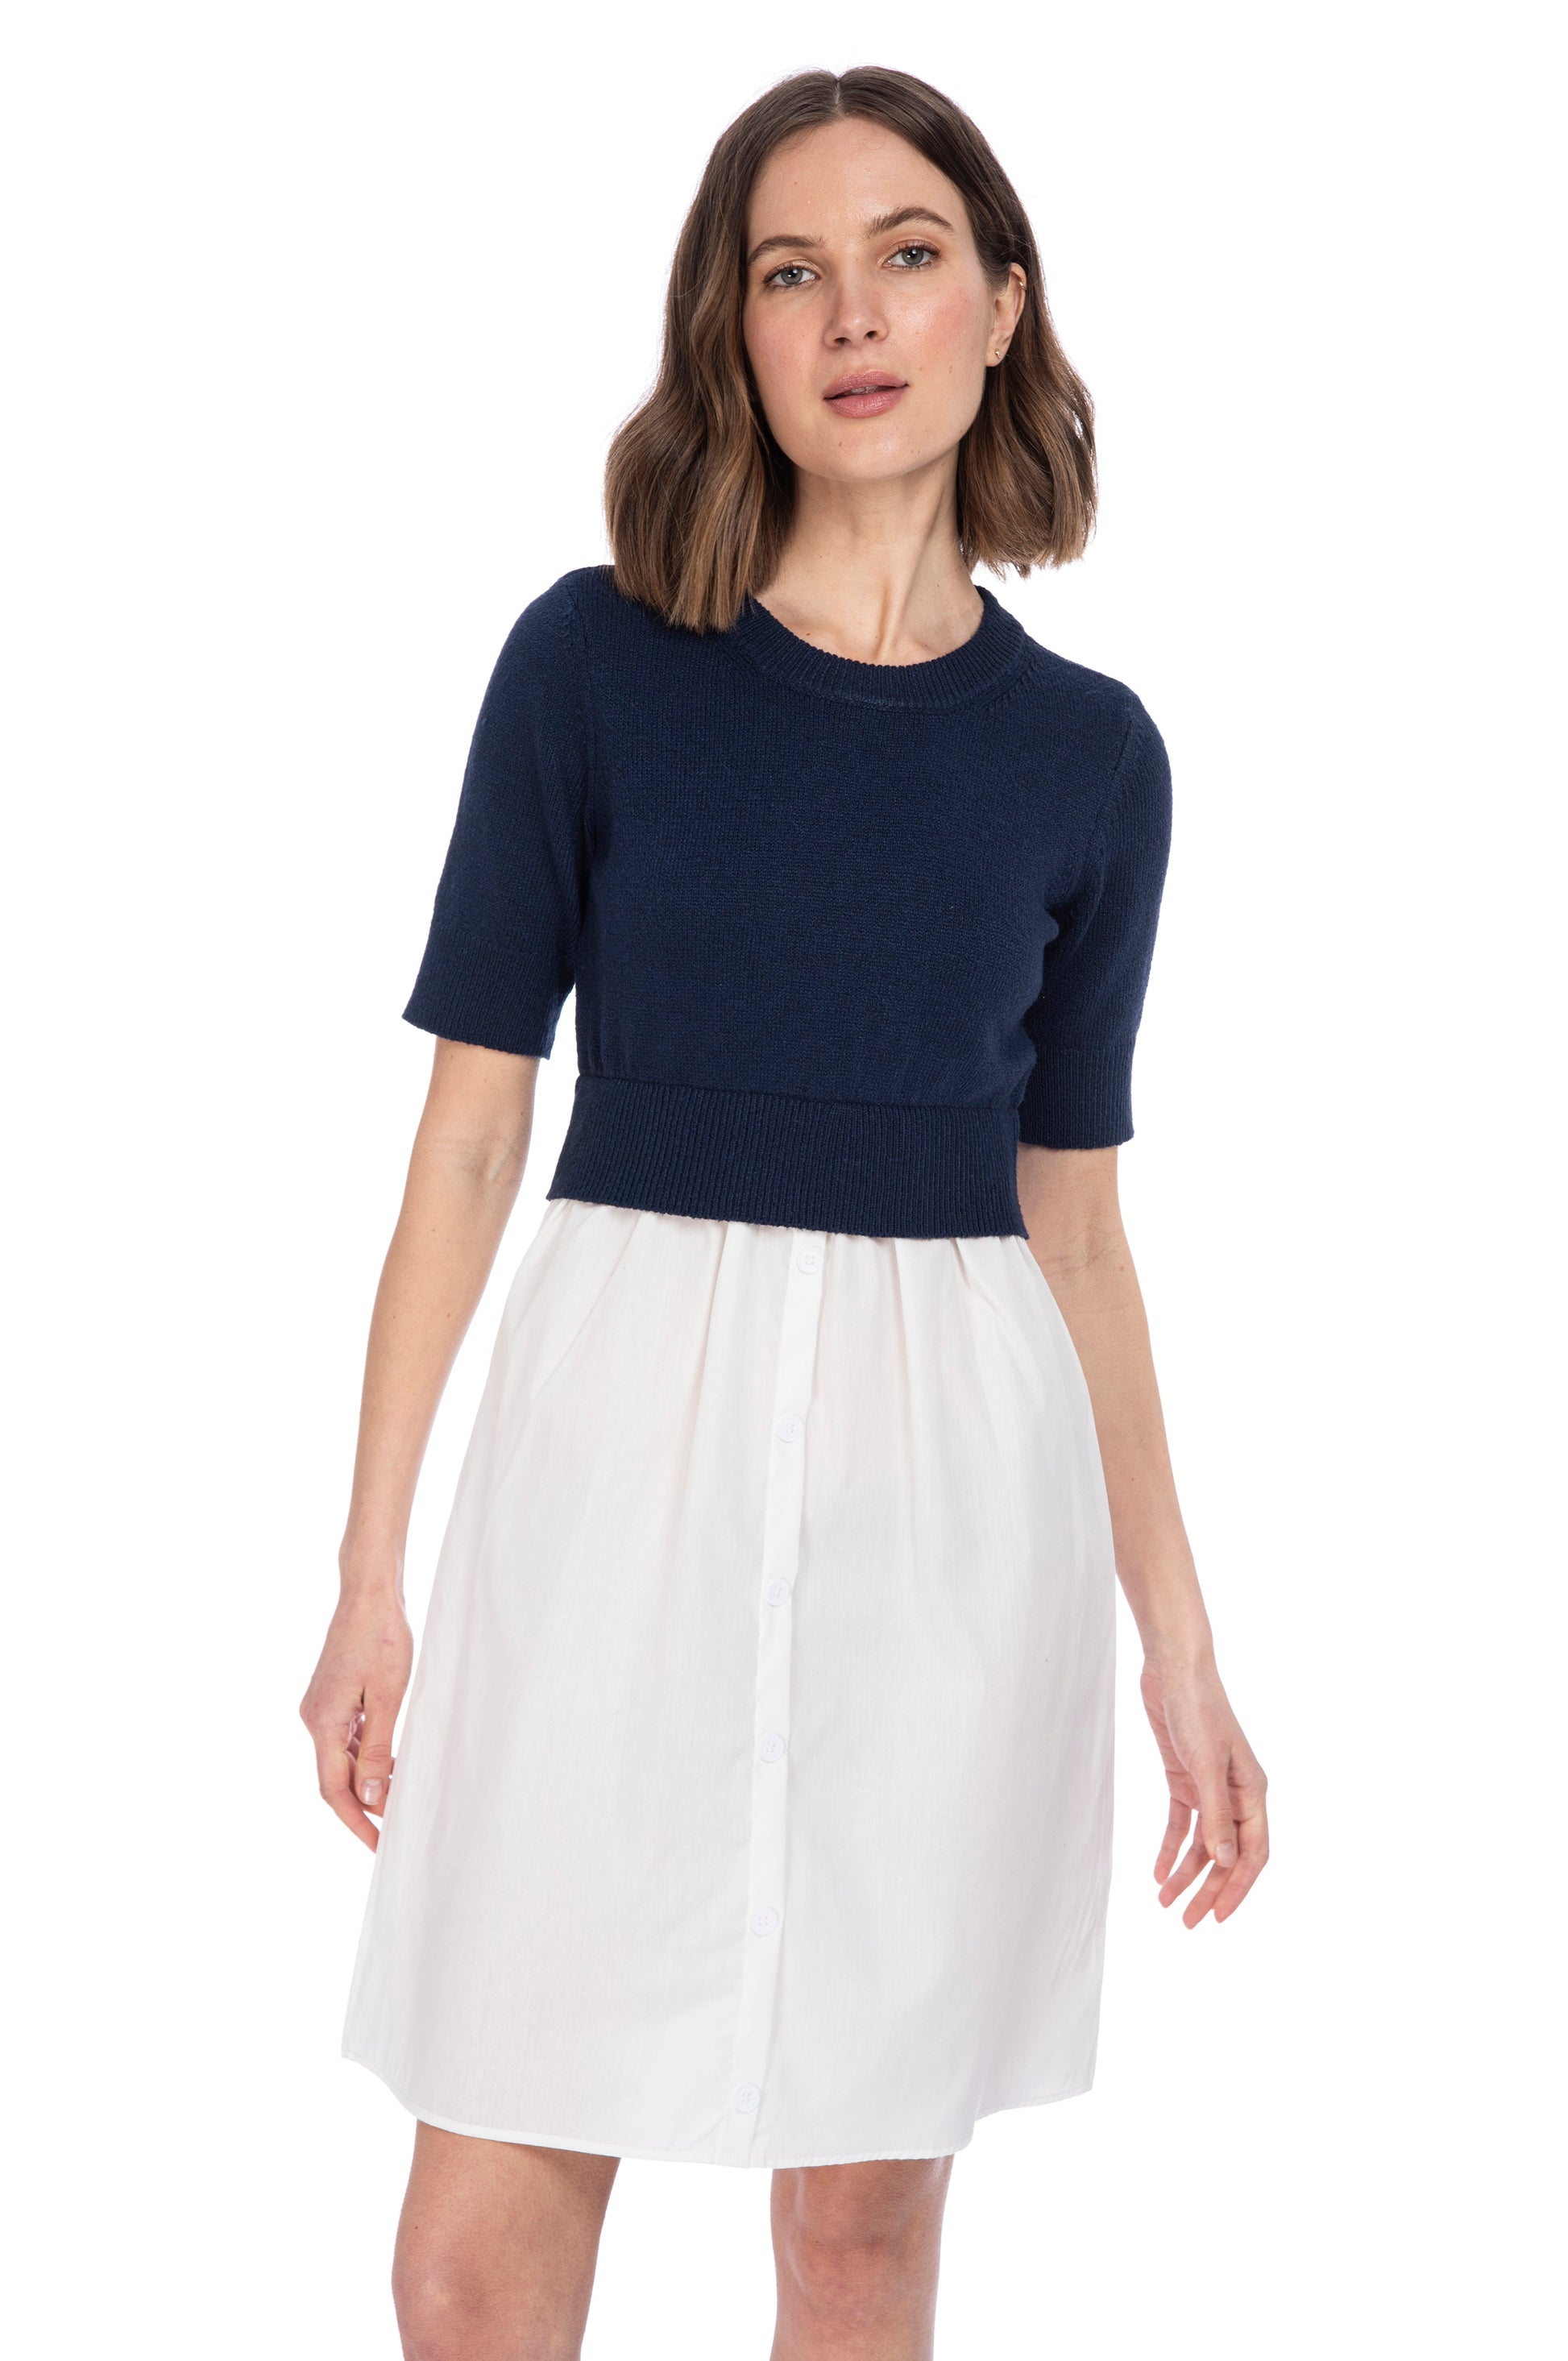 A woman in a stylish navy blue striped sweater vest from B Collection by Bobeau and a white poplin knee-length skirt posing against a white background.